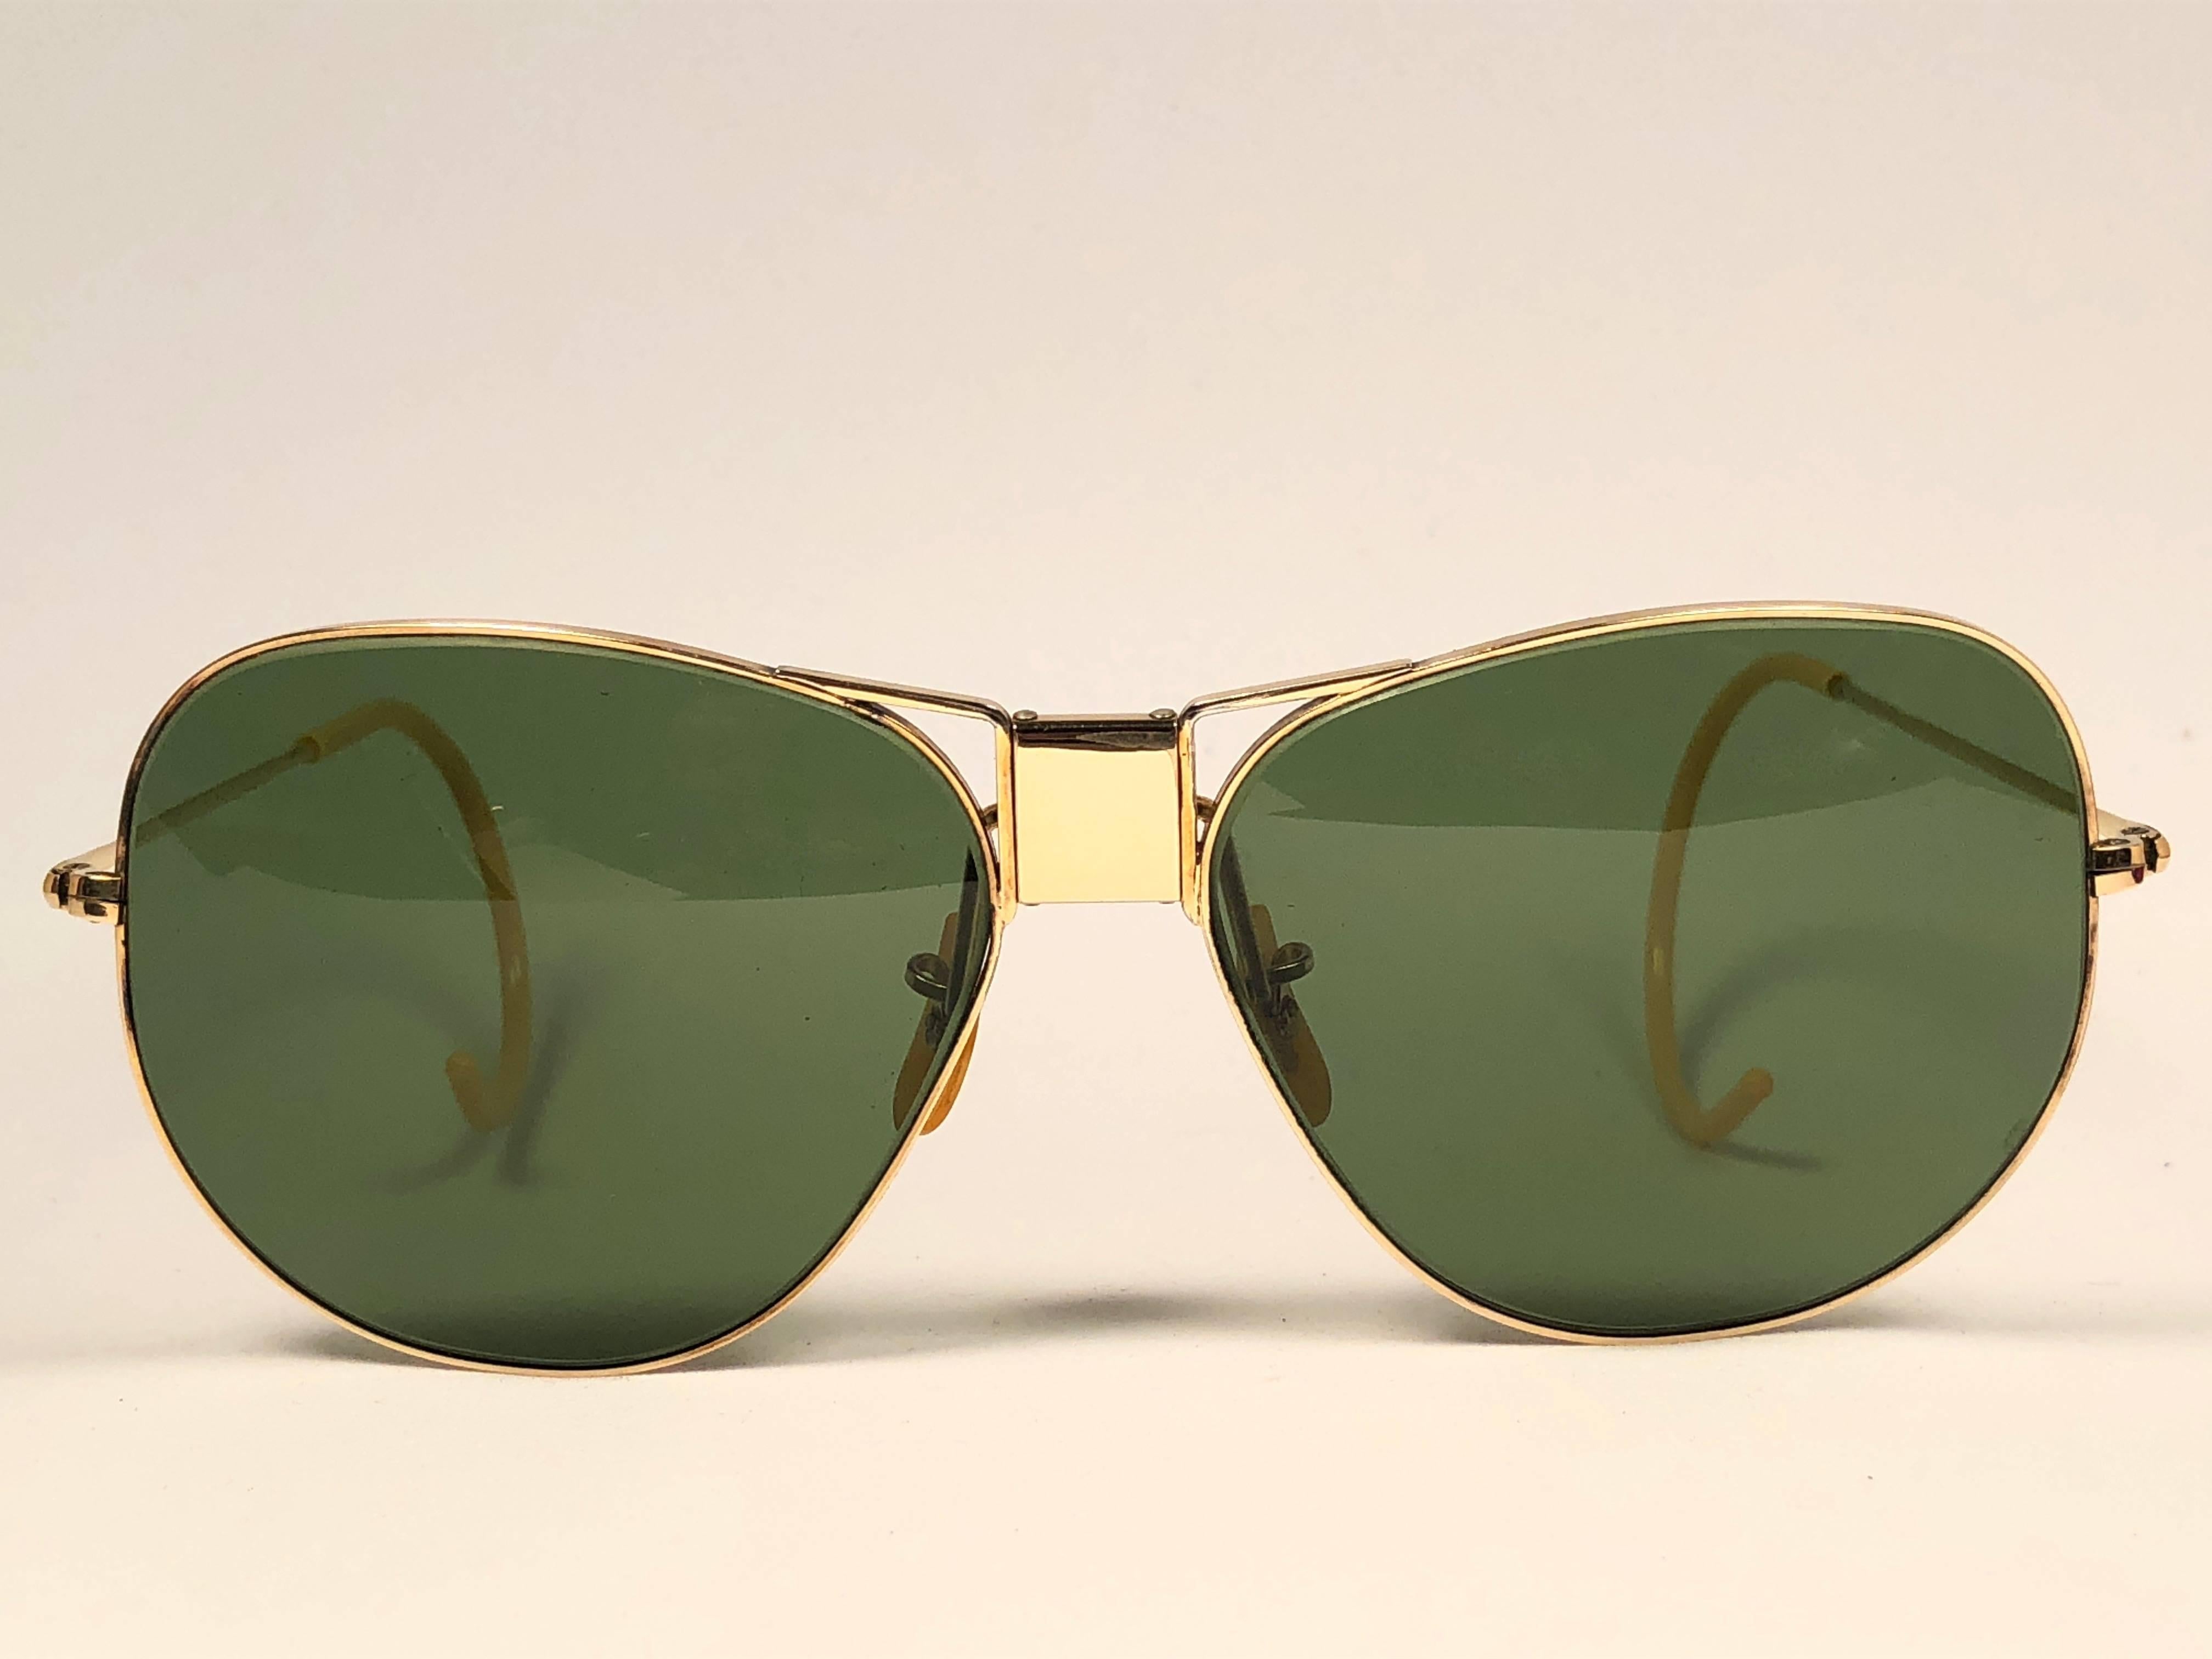 Superb pair. Classic Hinged Butterfly 12K gold filled frame. USA Made by Bausch and Lomb. Original True Green RB3 B&L lenses. 
Marked on top of the bridge BL 12K GF ( Gold Filled ). Amazing original Bausch and Lomb case. The case has stains on the